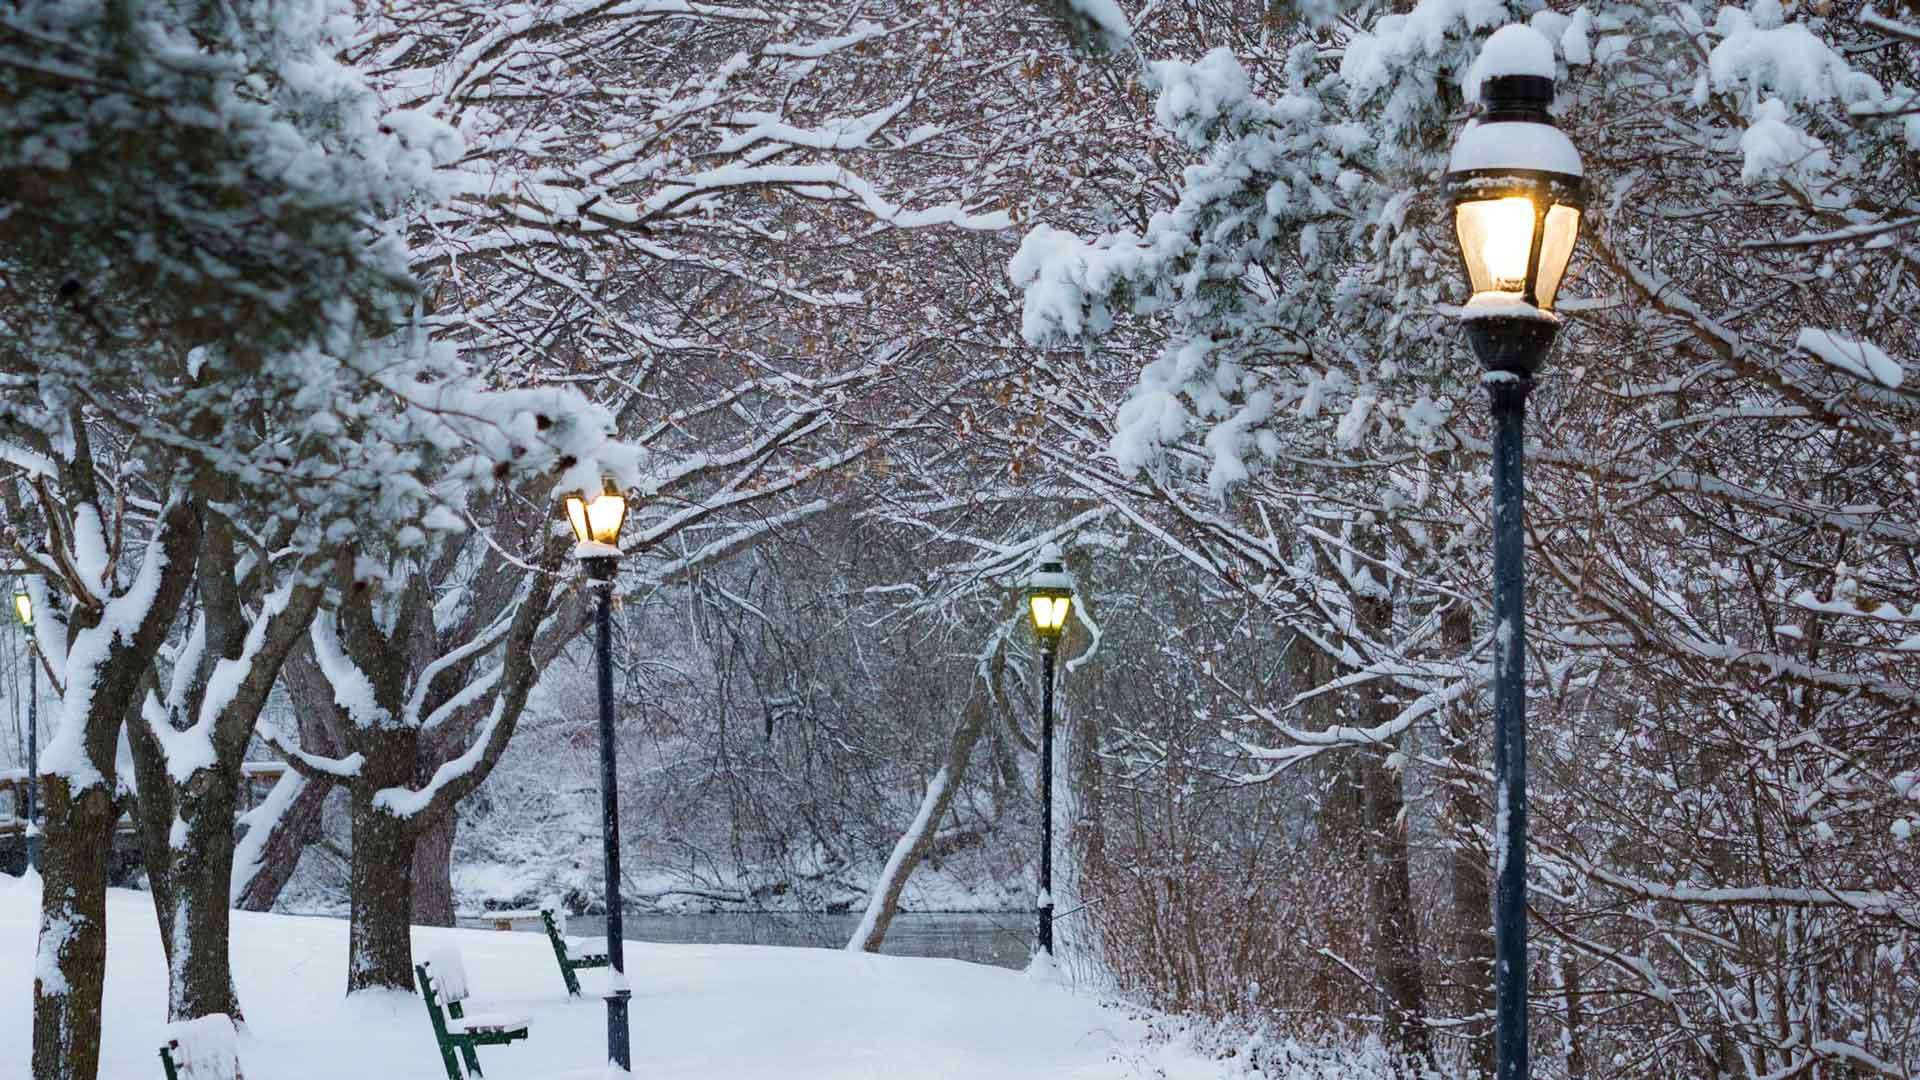 Lampposts, benches and trees covered in snow